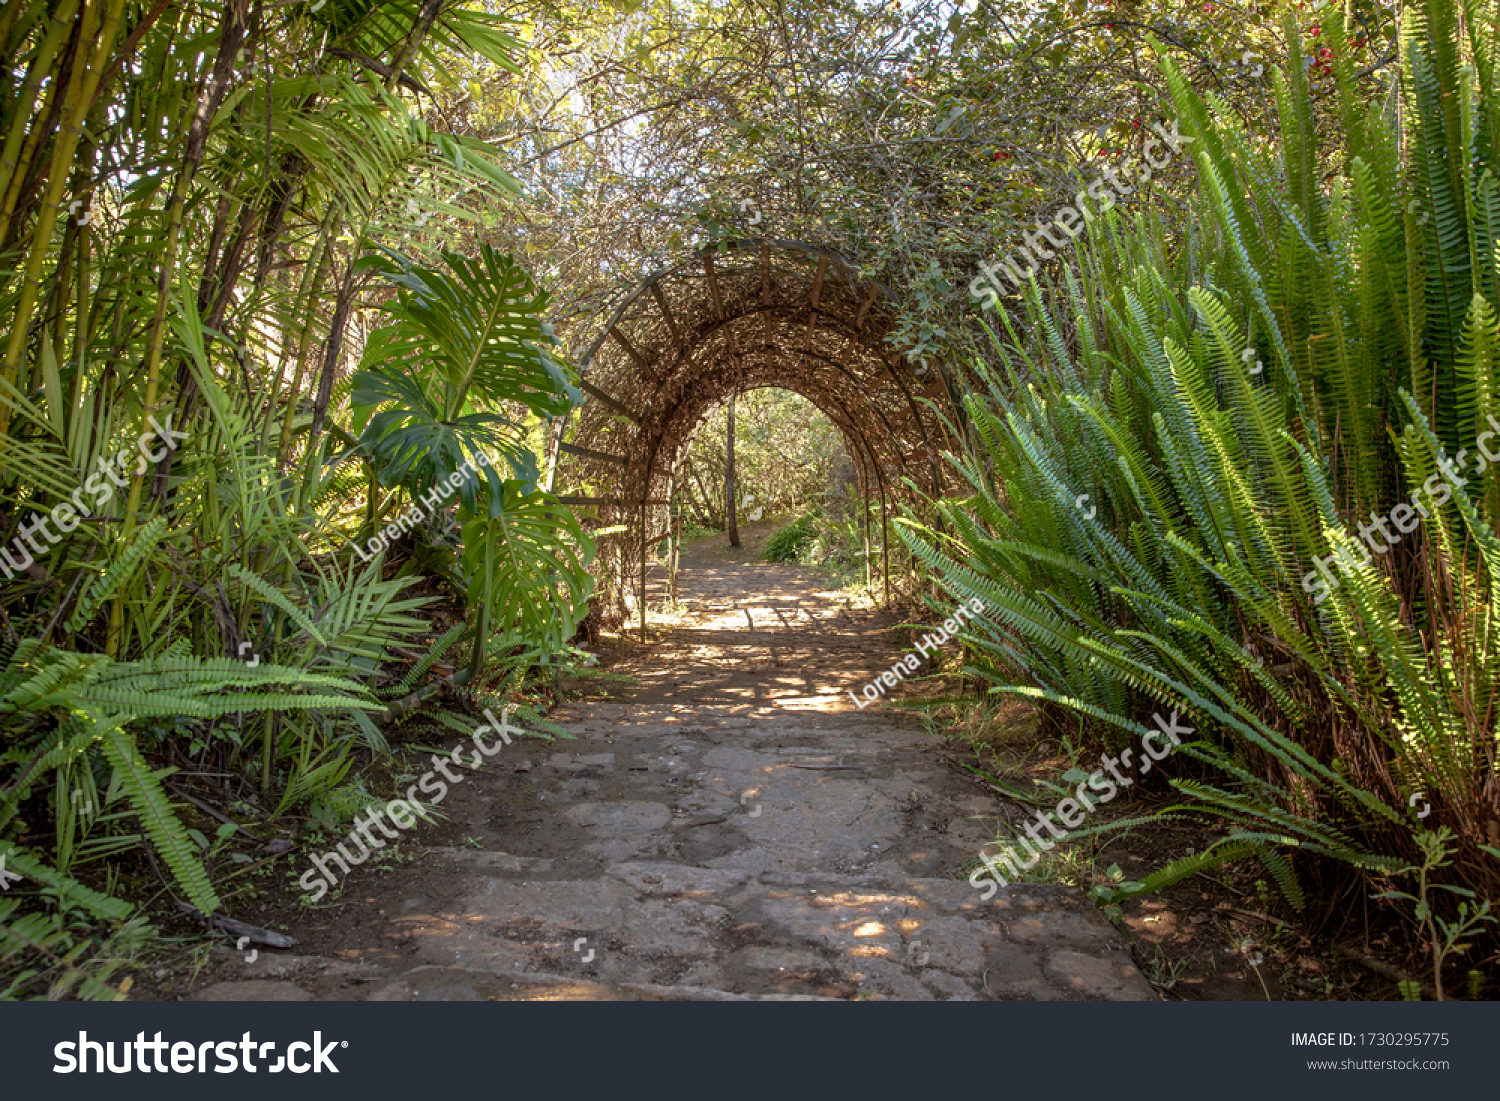 
Passageway covered with foliage and vegetation in the Mazamitla forest. #1730295775